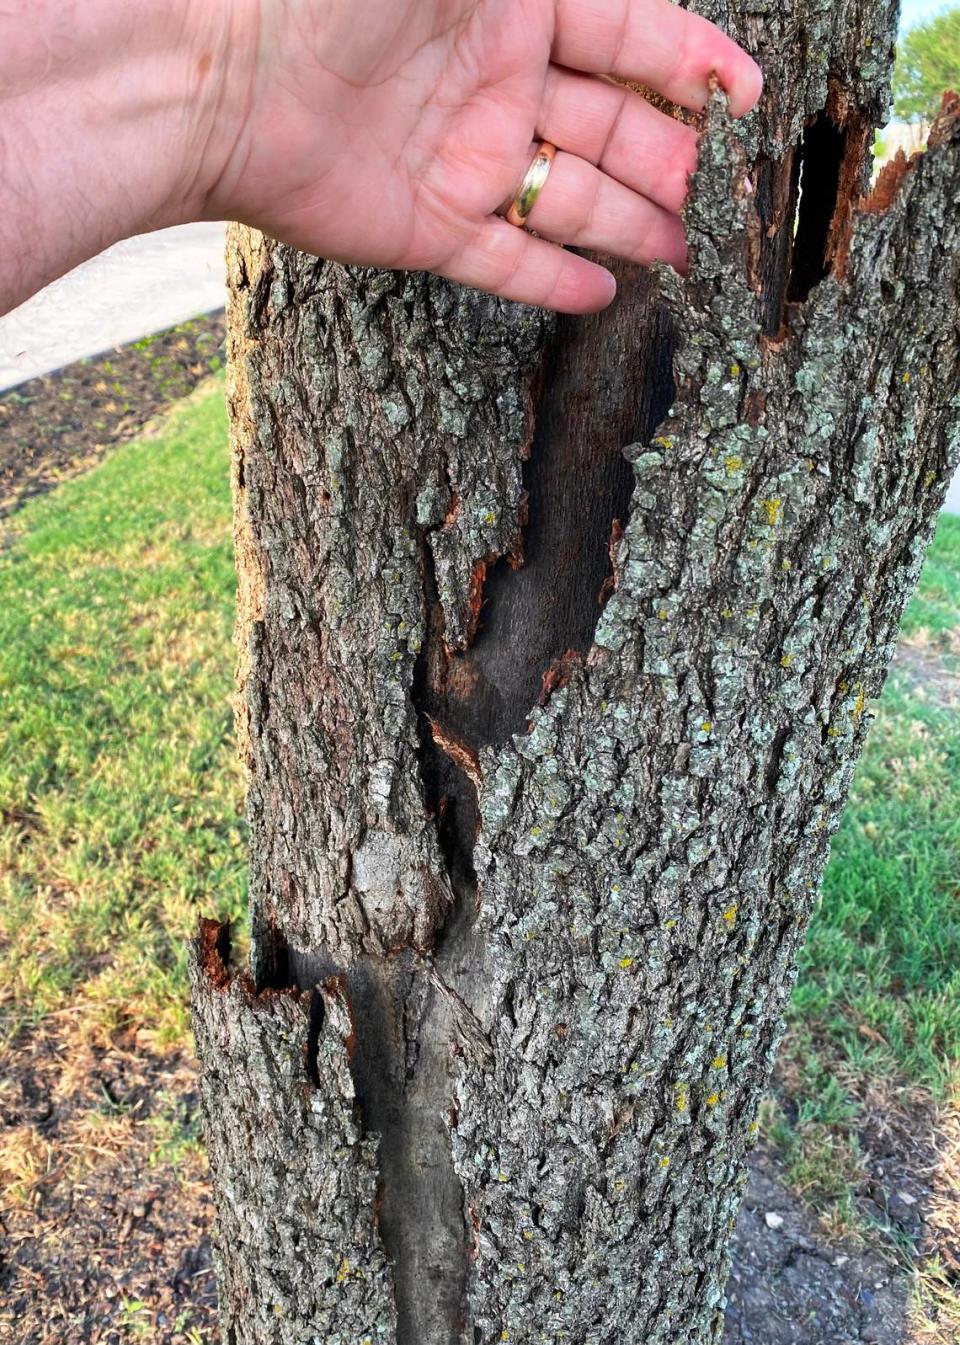 Severe radial “shake” of a live oak’s bark, caused by the extreme cold that hit Texas in February 2021.